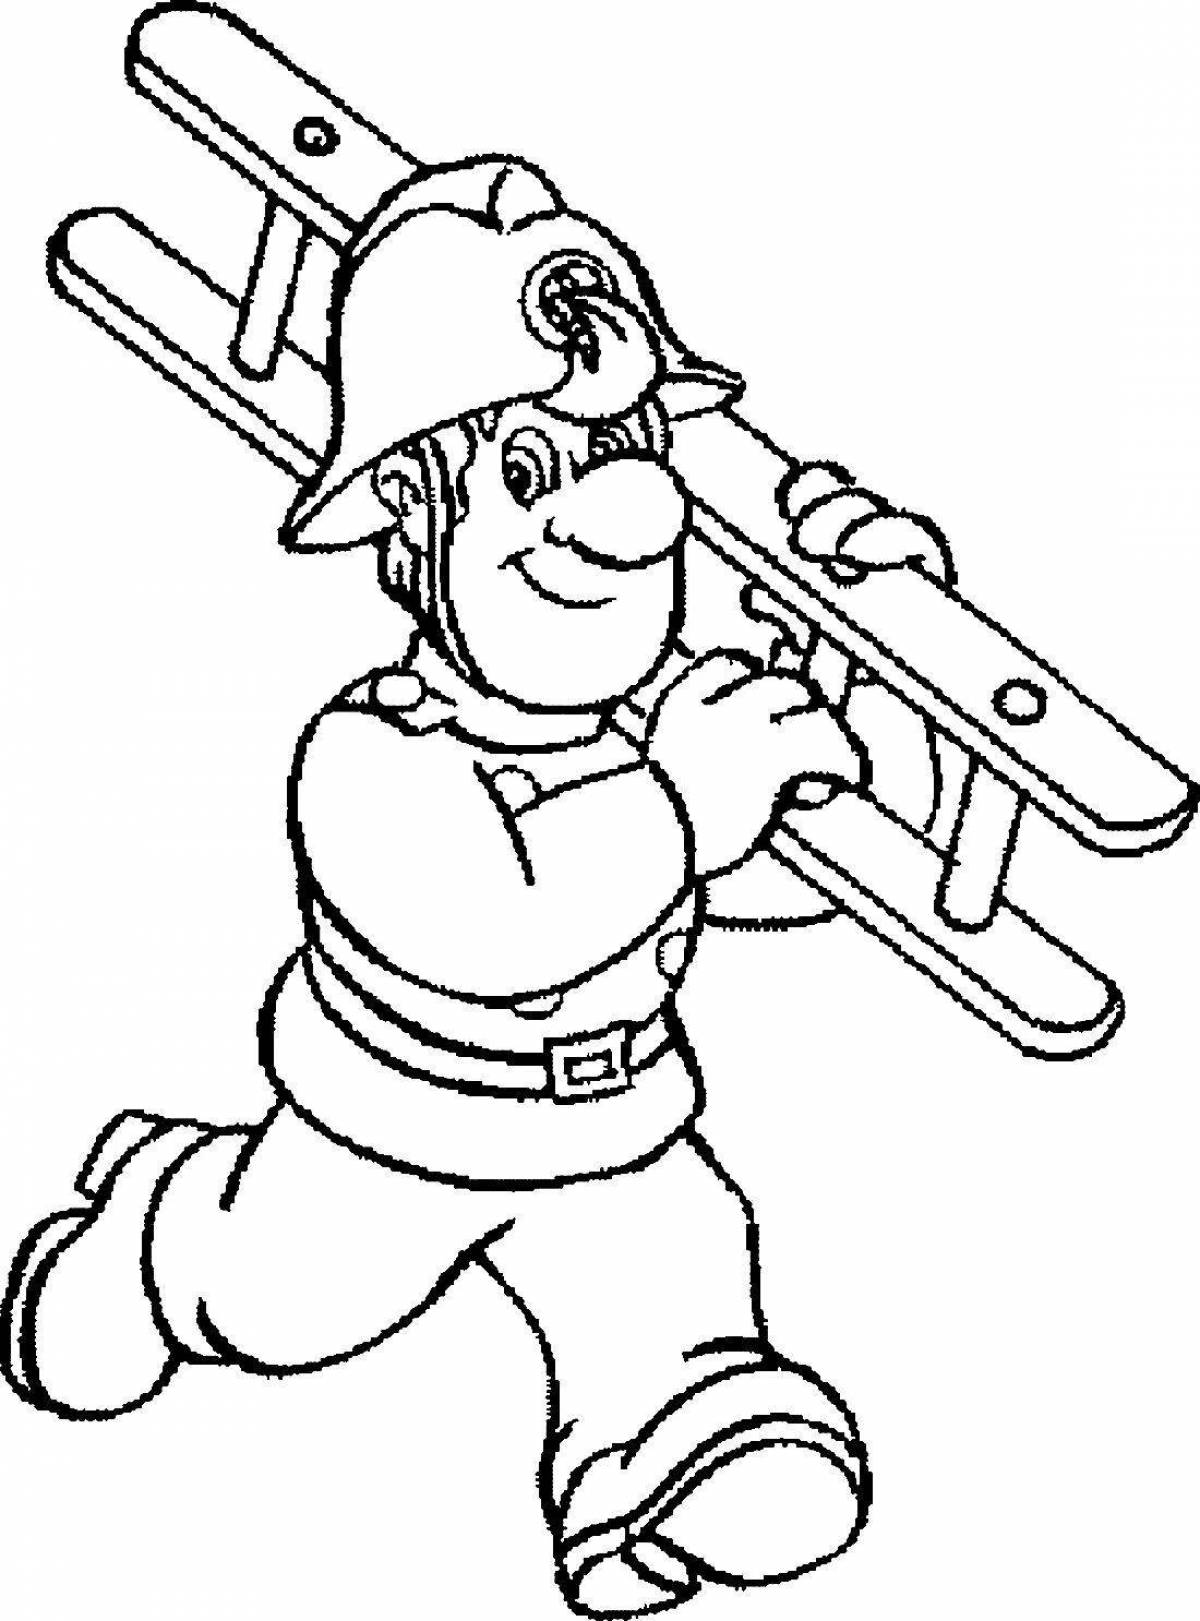 Exquisite firefighter coloring book for kids